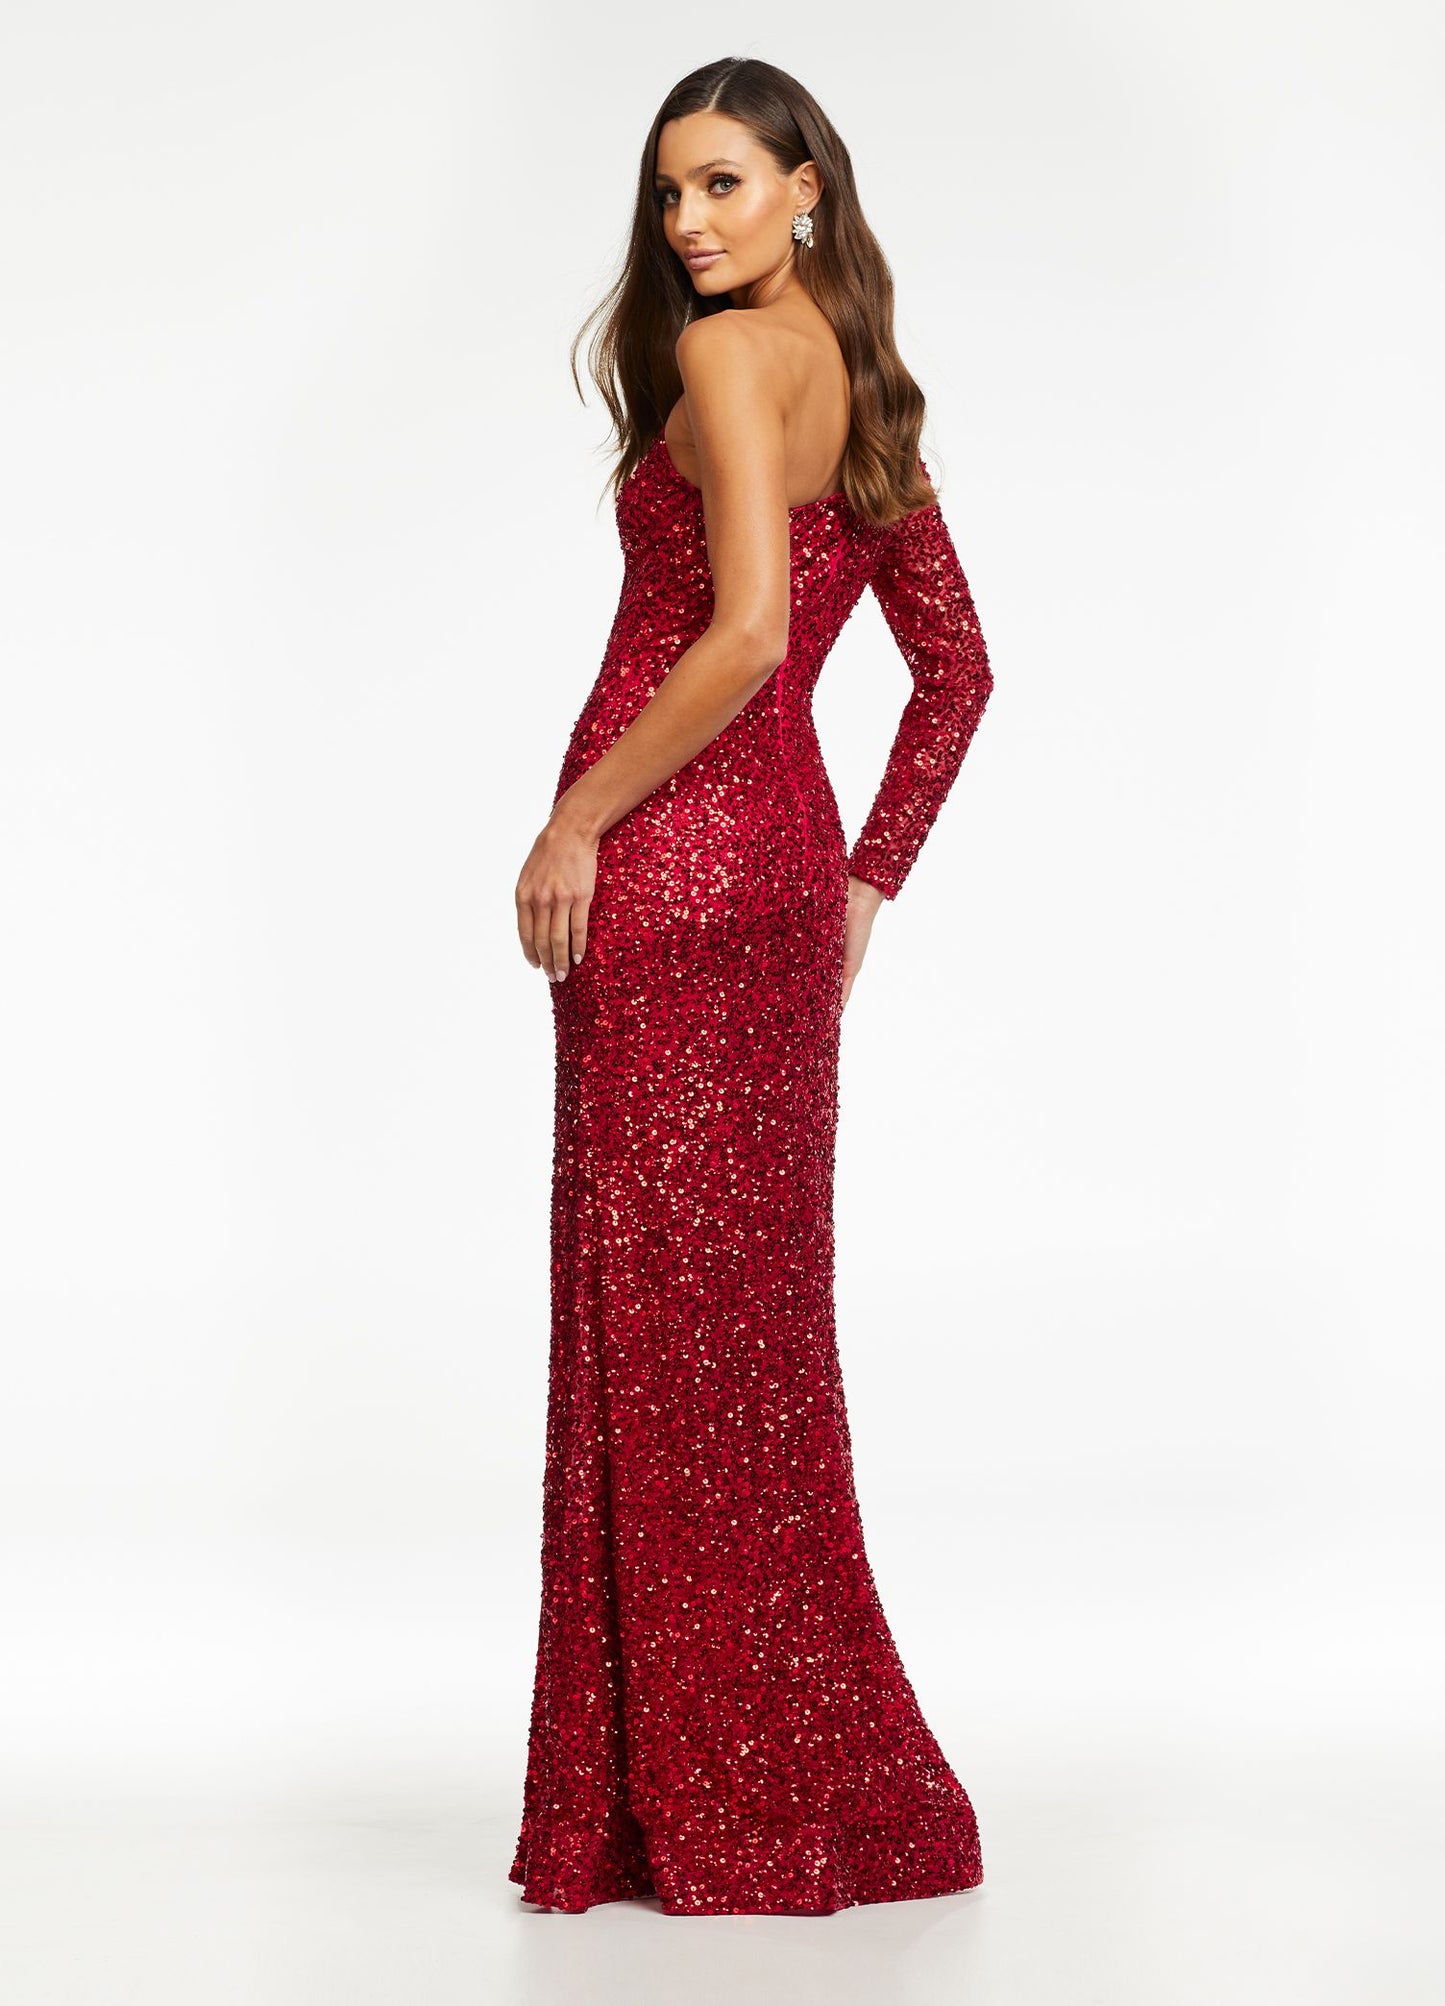 Ashley Lauren 1977 Prom Dress Pageant Gown One Sleeve Fully Beaded Long Prom Dress with High Side Slit